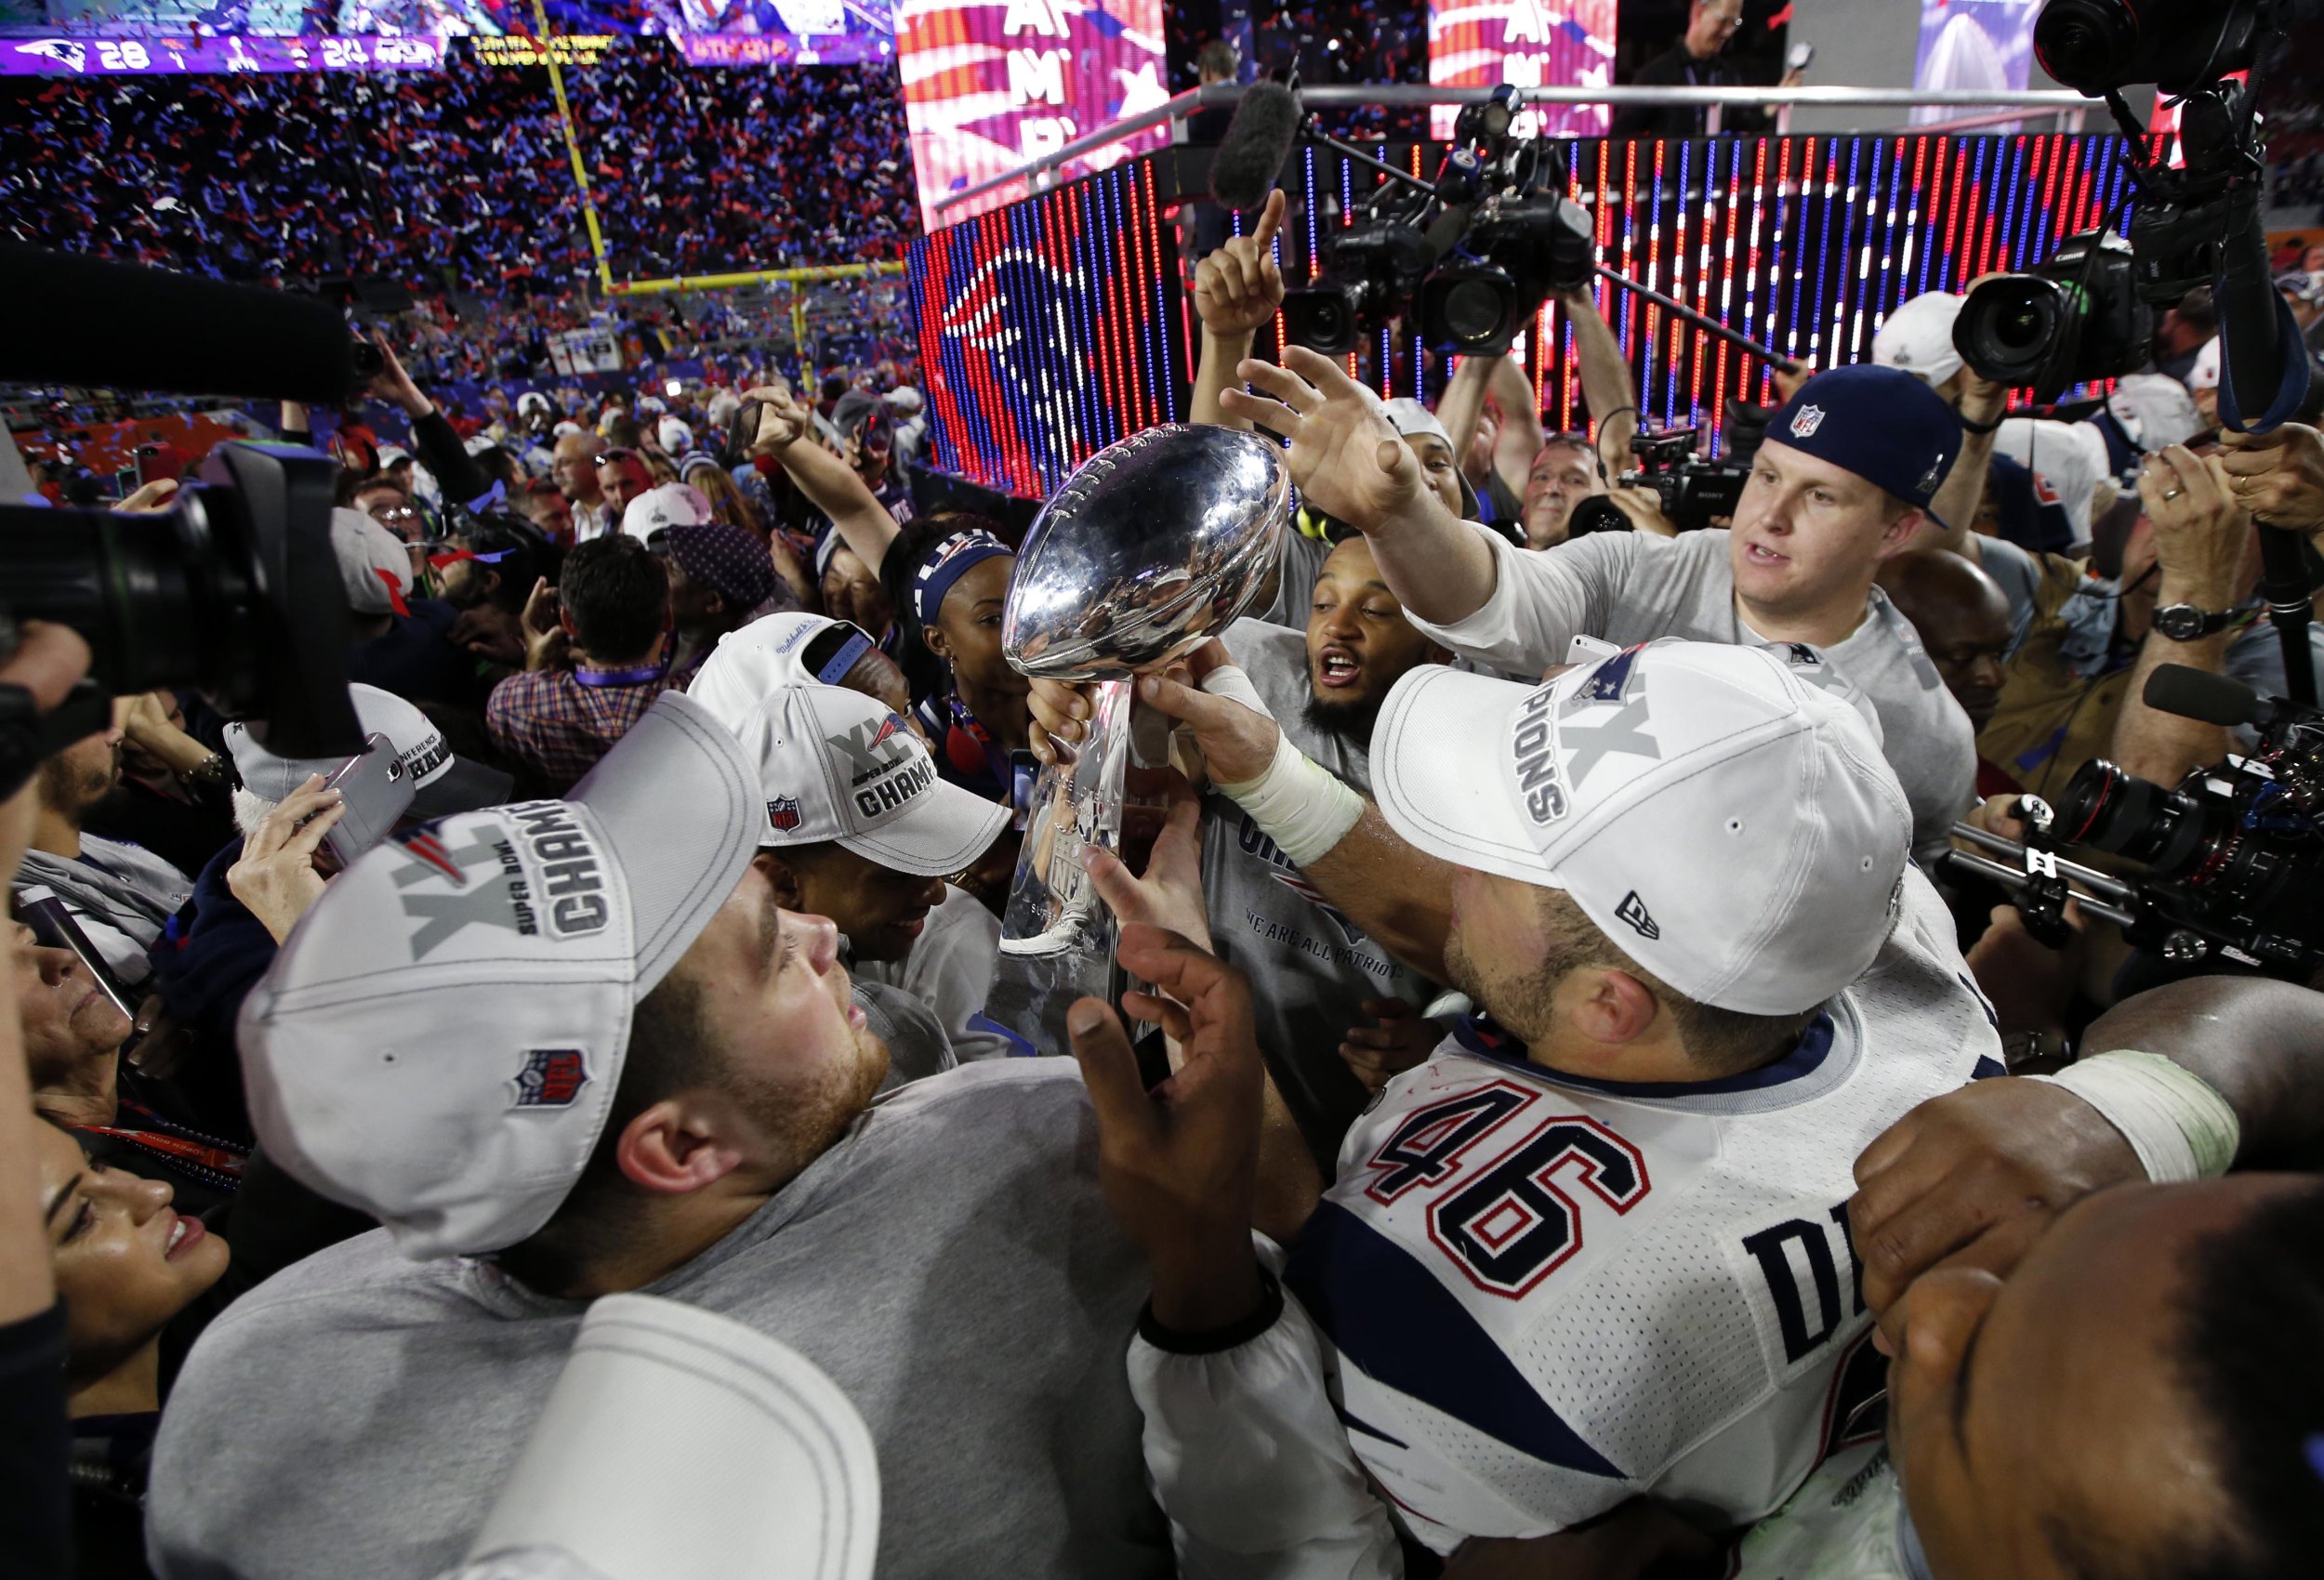 Super Bowl Xlix With Hashtag Sb49 Was The Most Tweeted Super Bowl Ever Ibtimes 4876